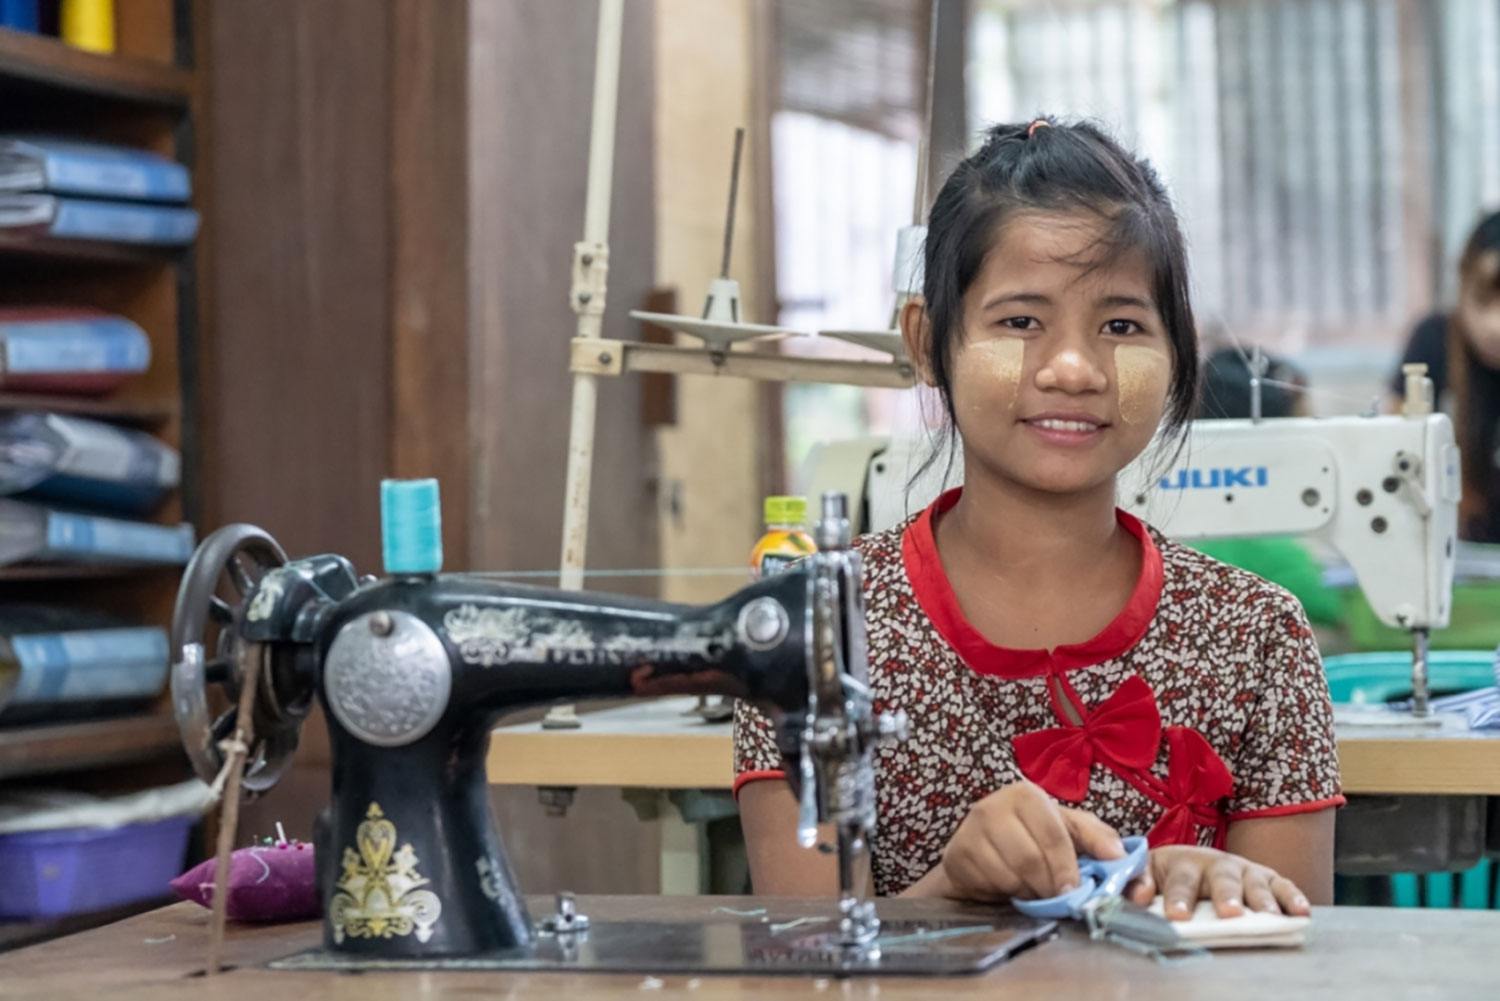 Child Labour in Myanmar: Two Girls get a New Start and Skills through Remediation